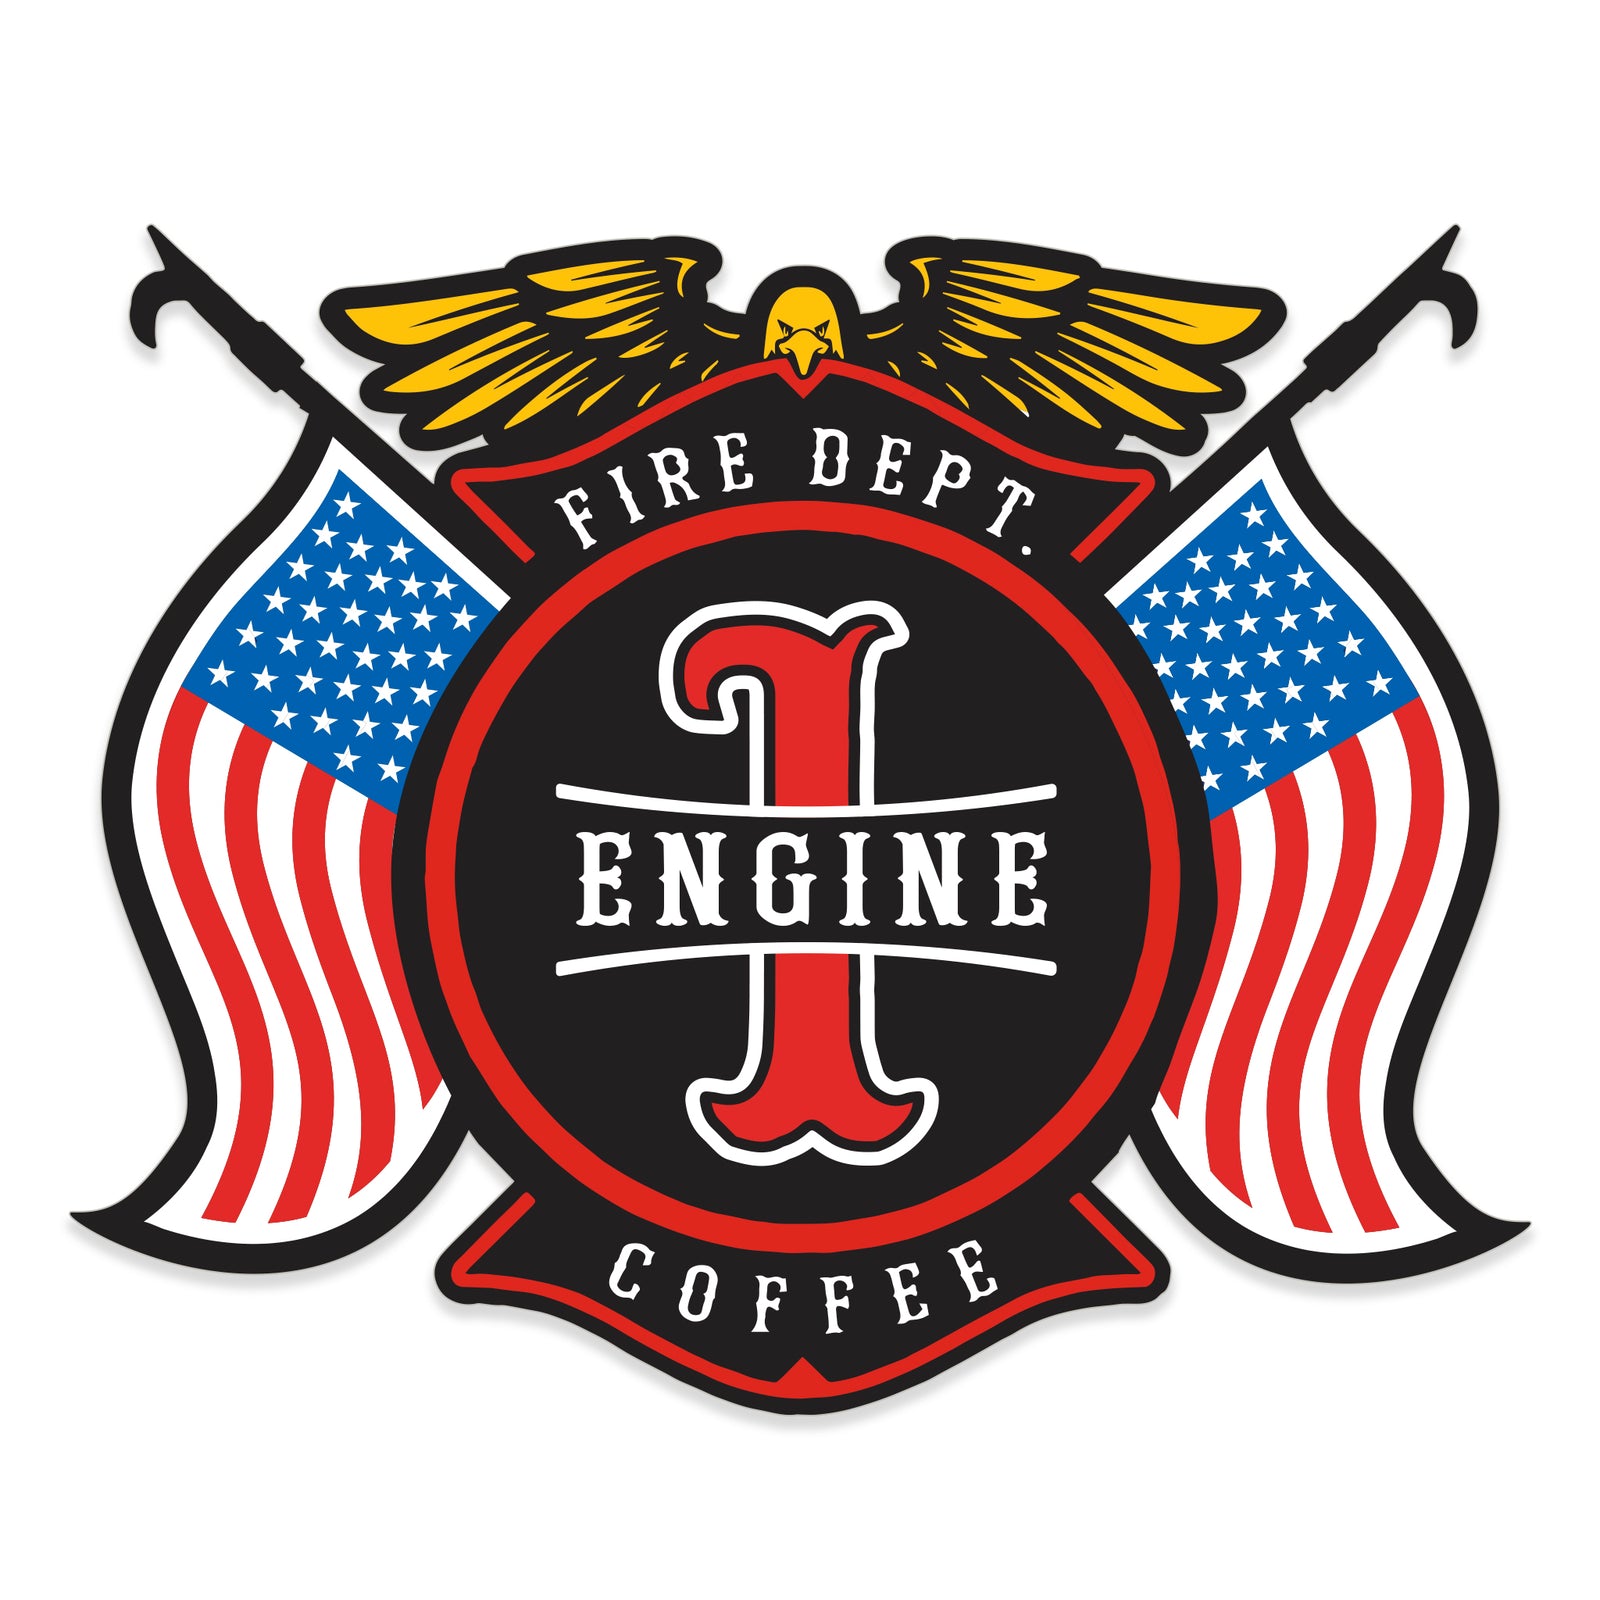 A maltese cross design with American flags on each side, a golden eagle on top and text that reads "Engine 1" in the center.